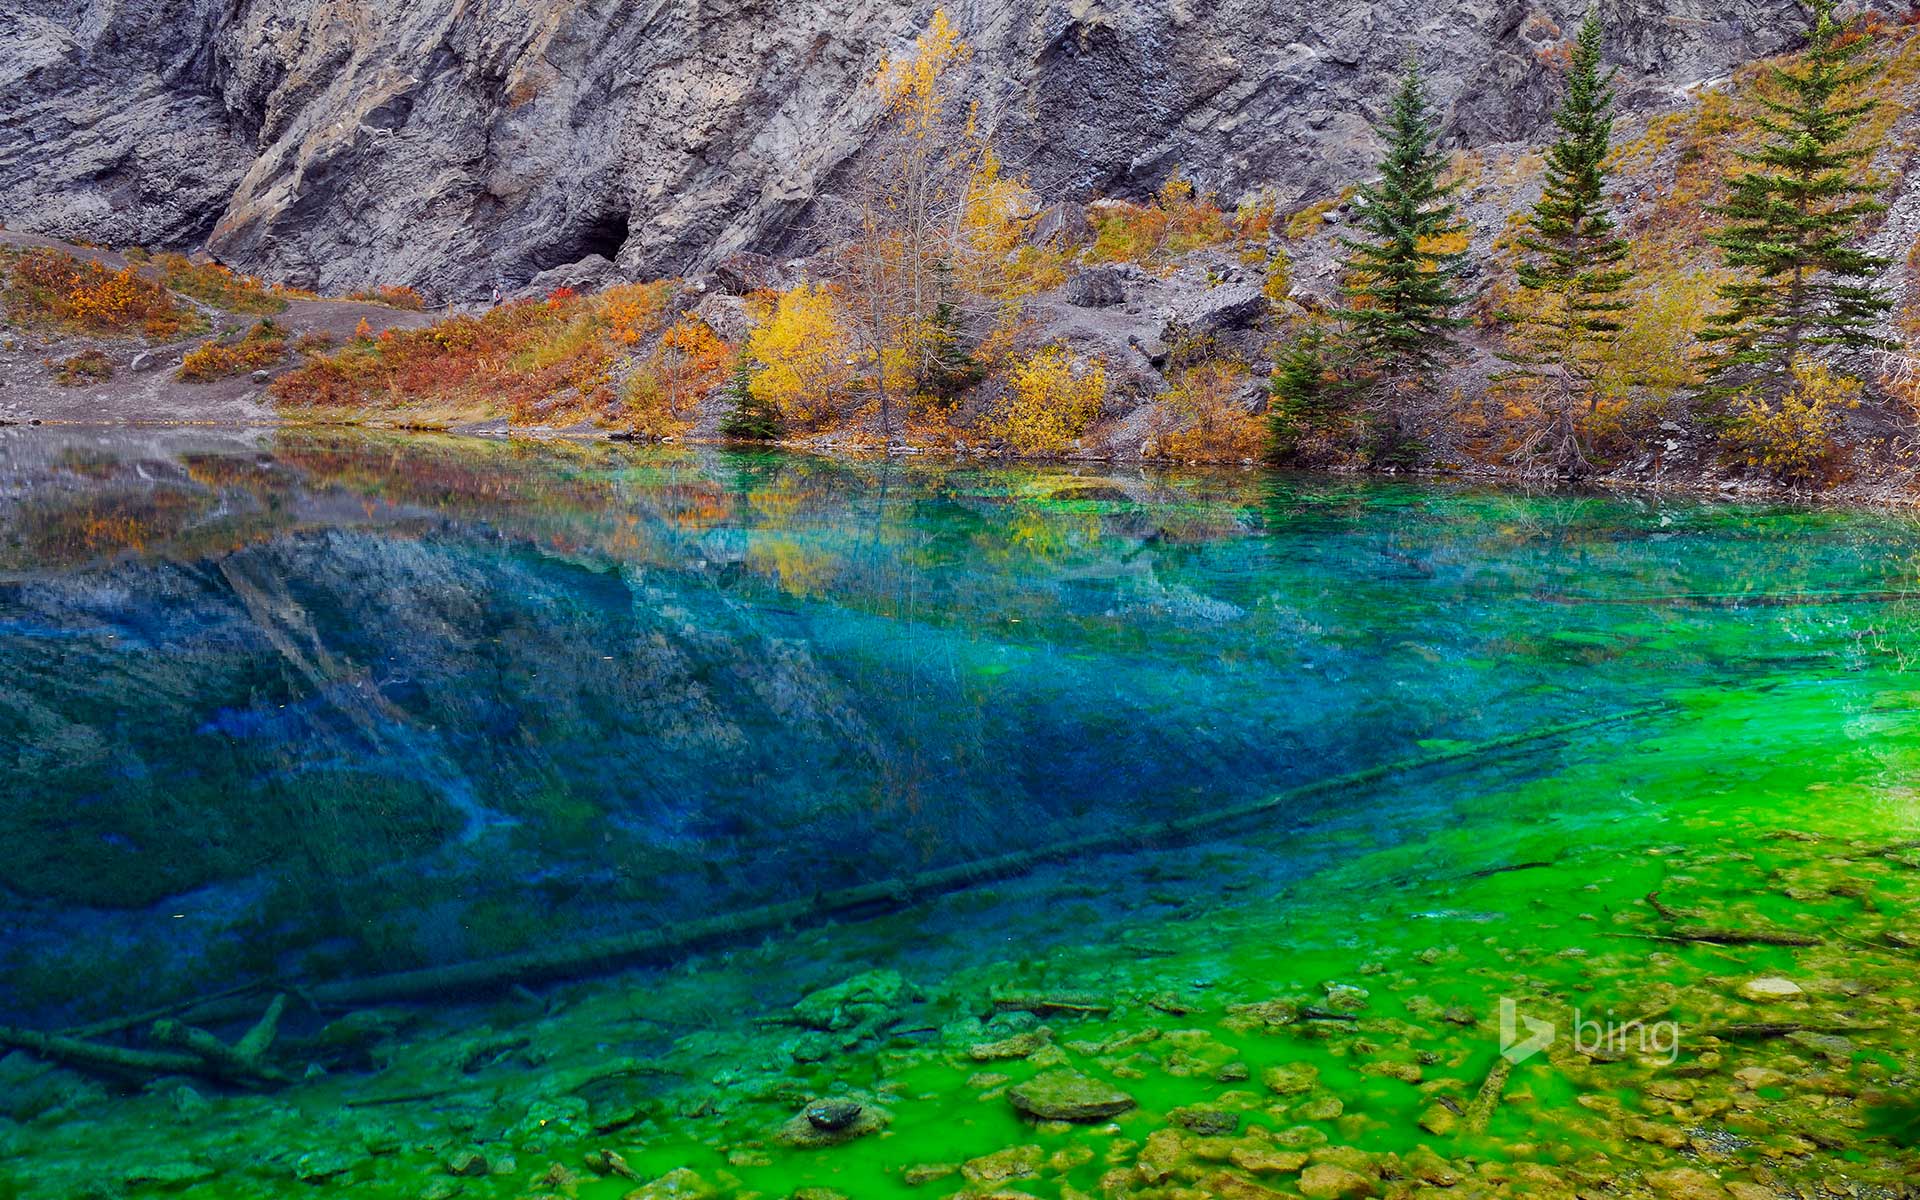 Blue and Green algae in the clear water of Grassi Lakes, near Canmore, Alberta, Canada